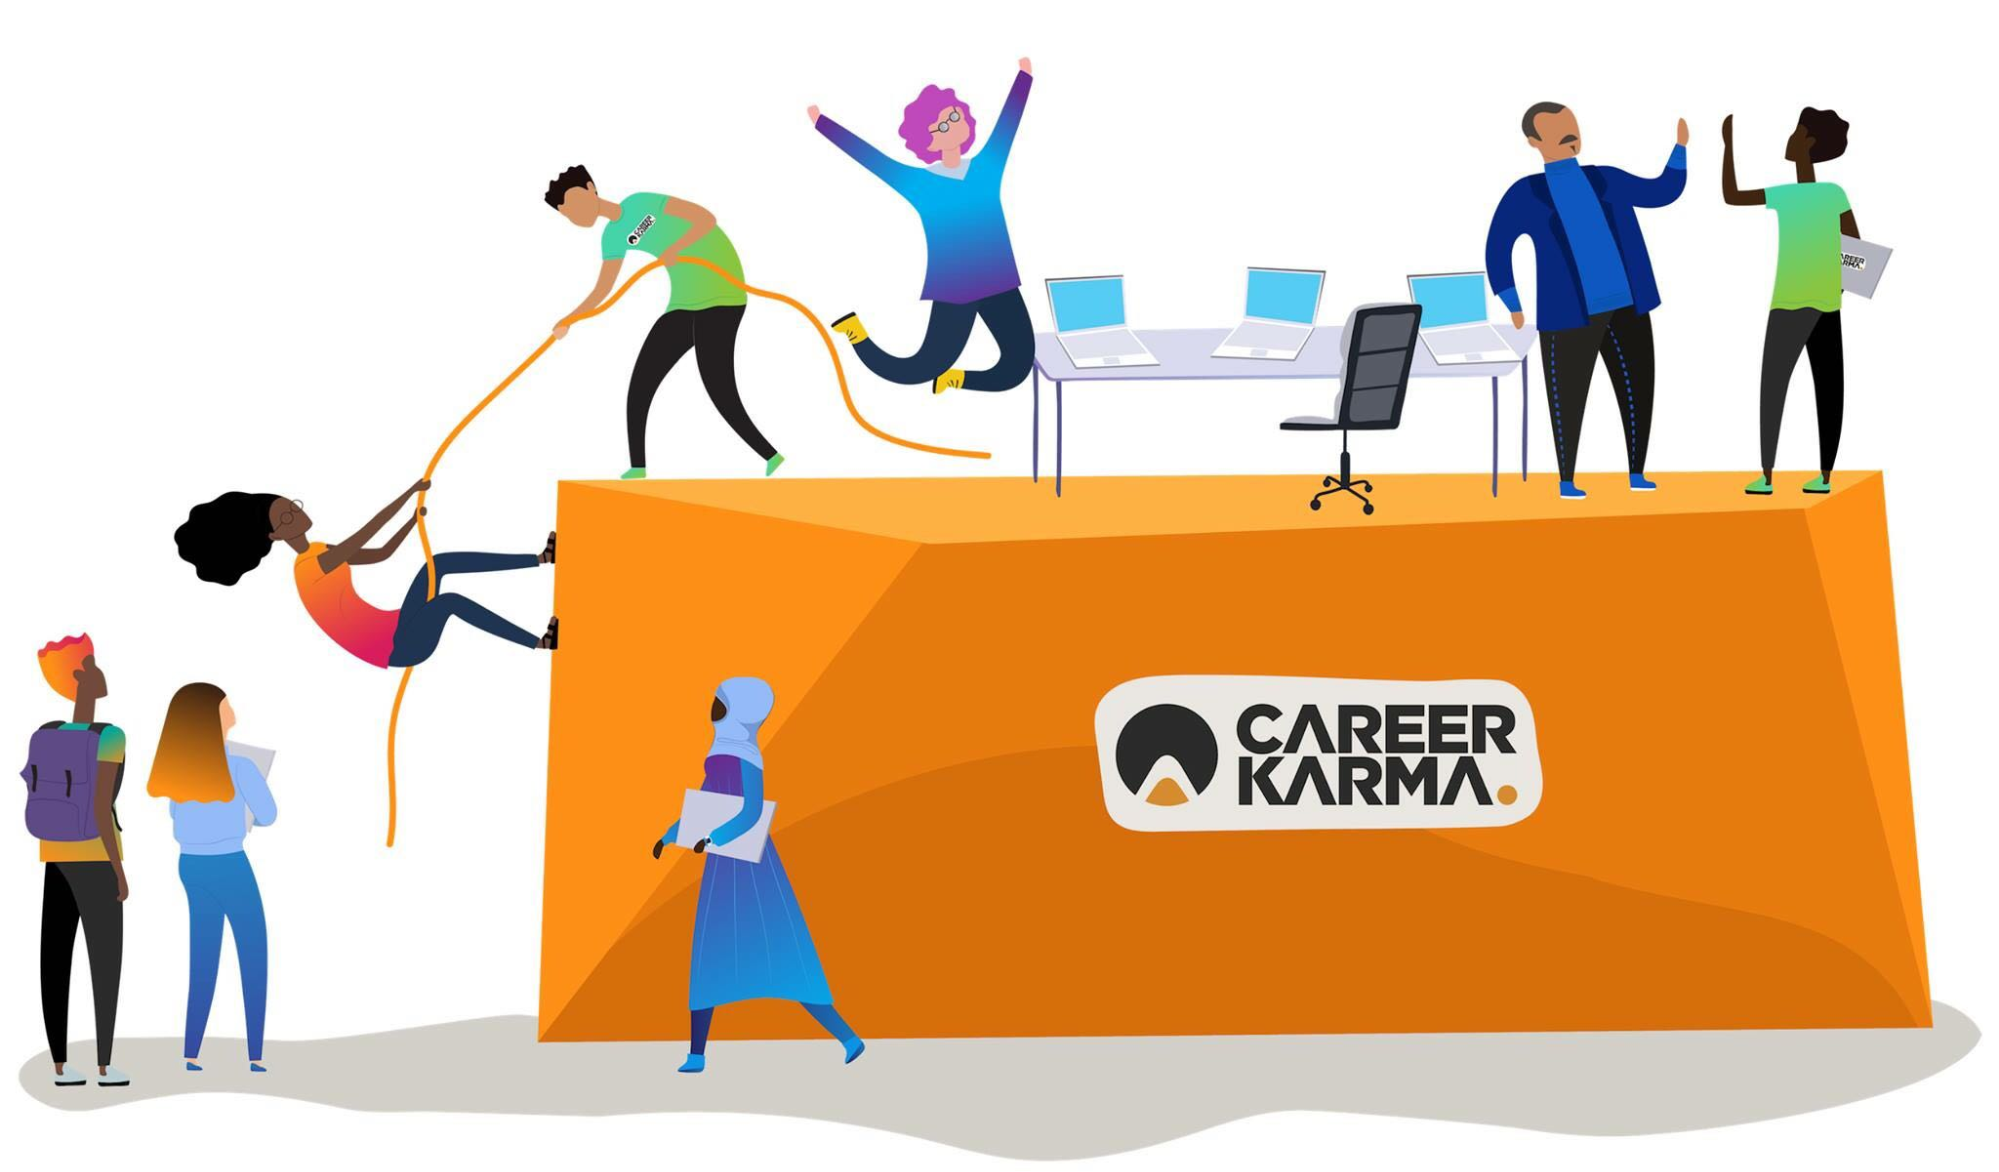 CareerKarma,com attracts over 3M+ monthly visitors